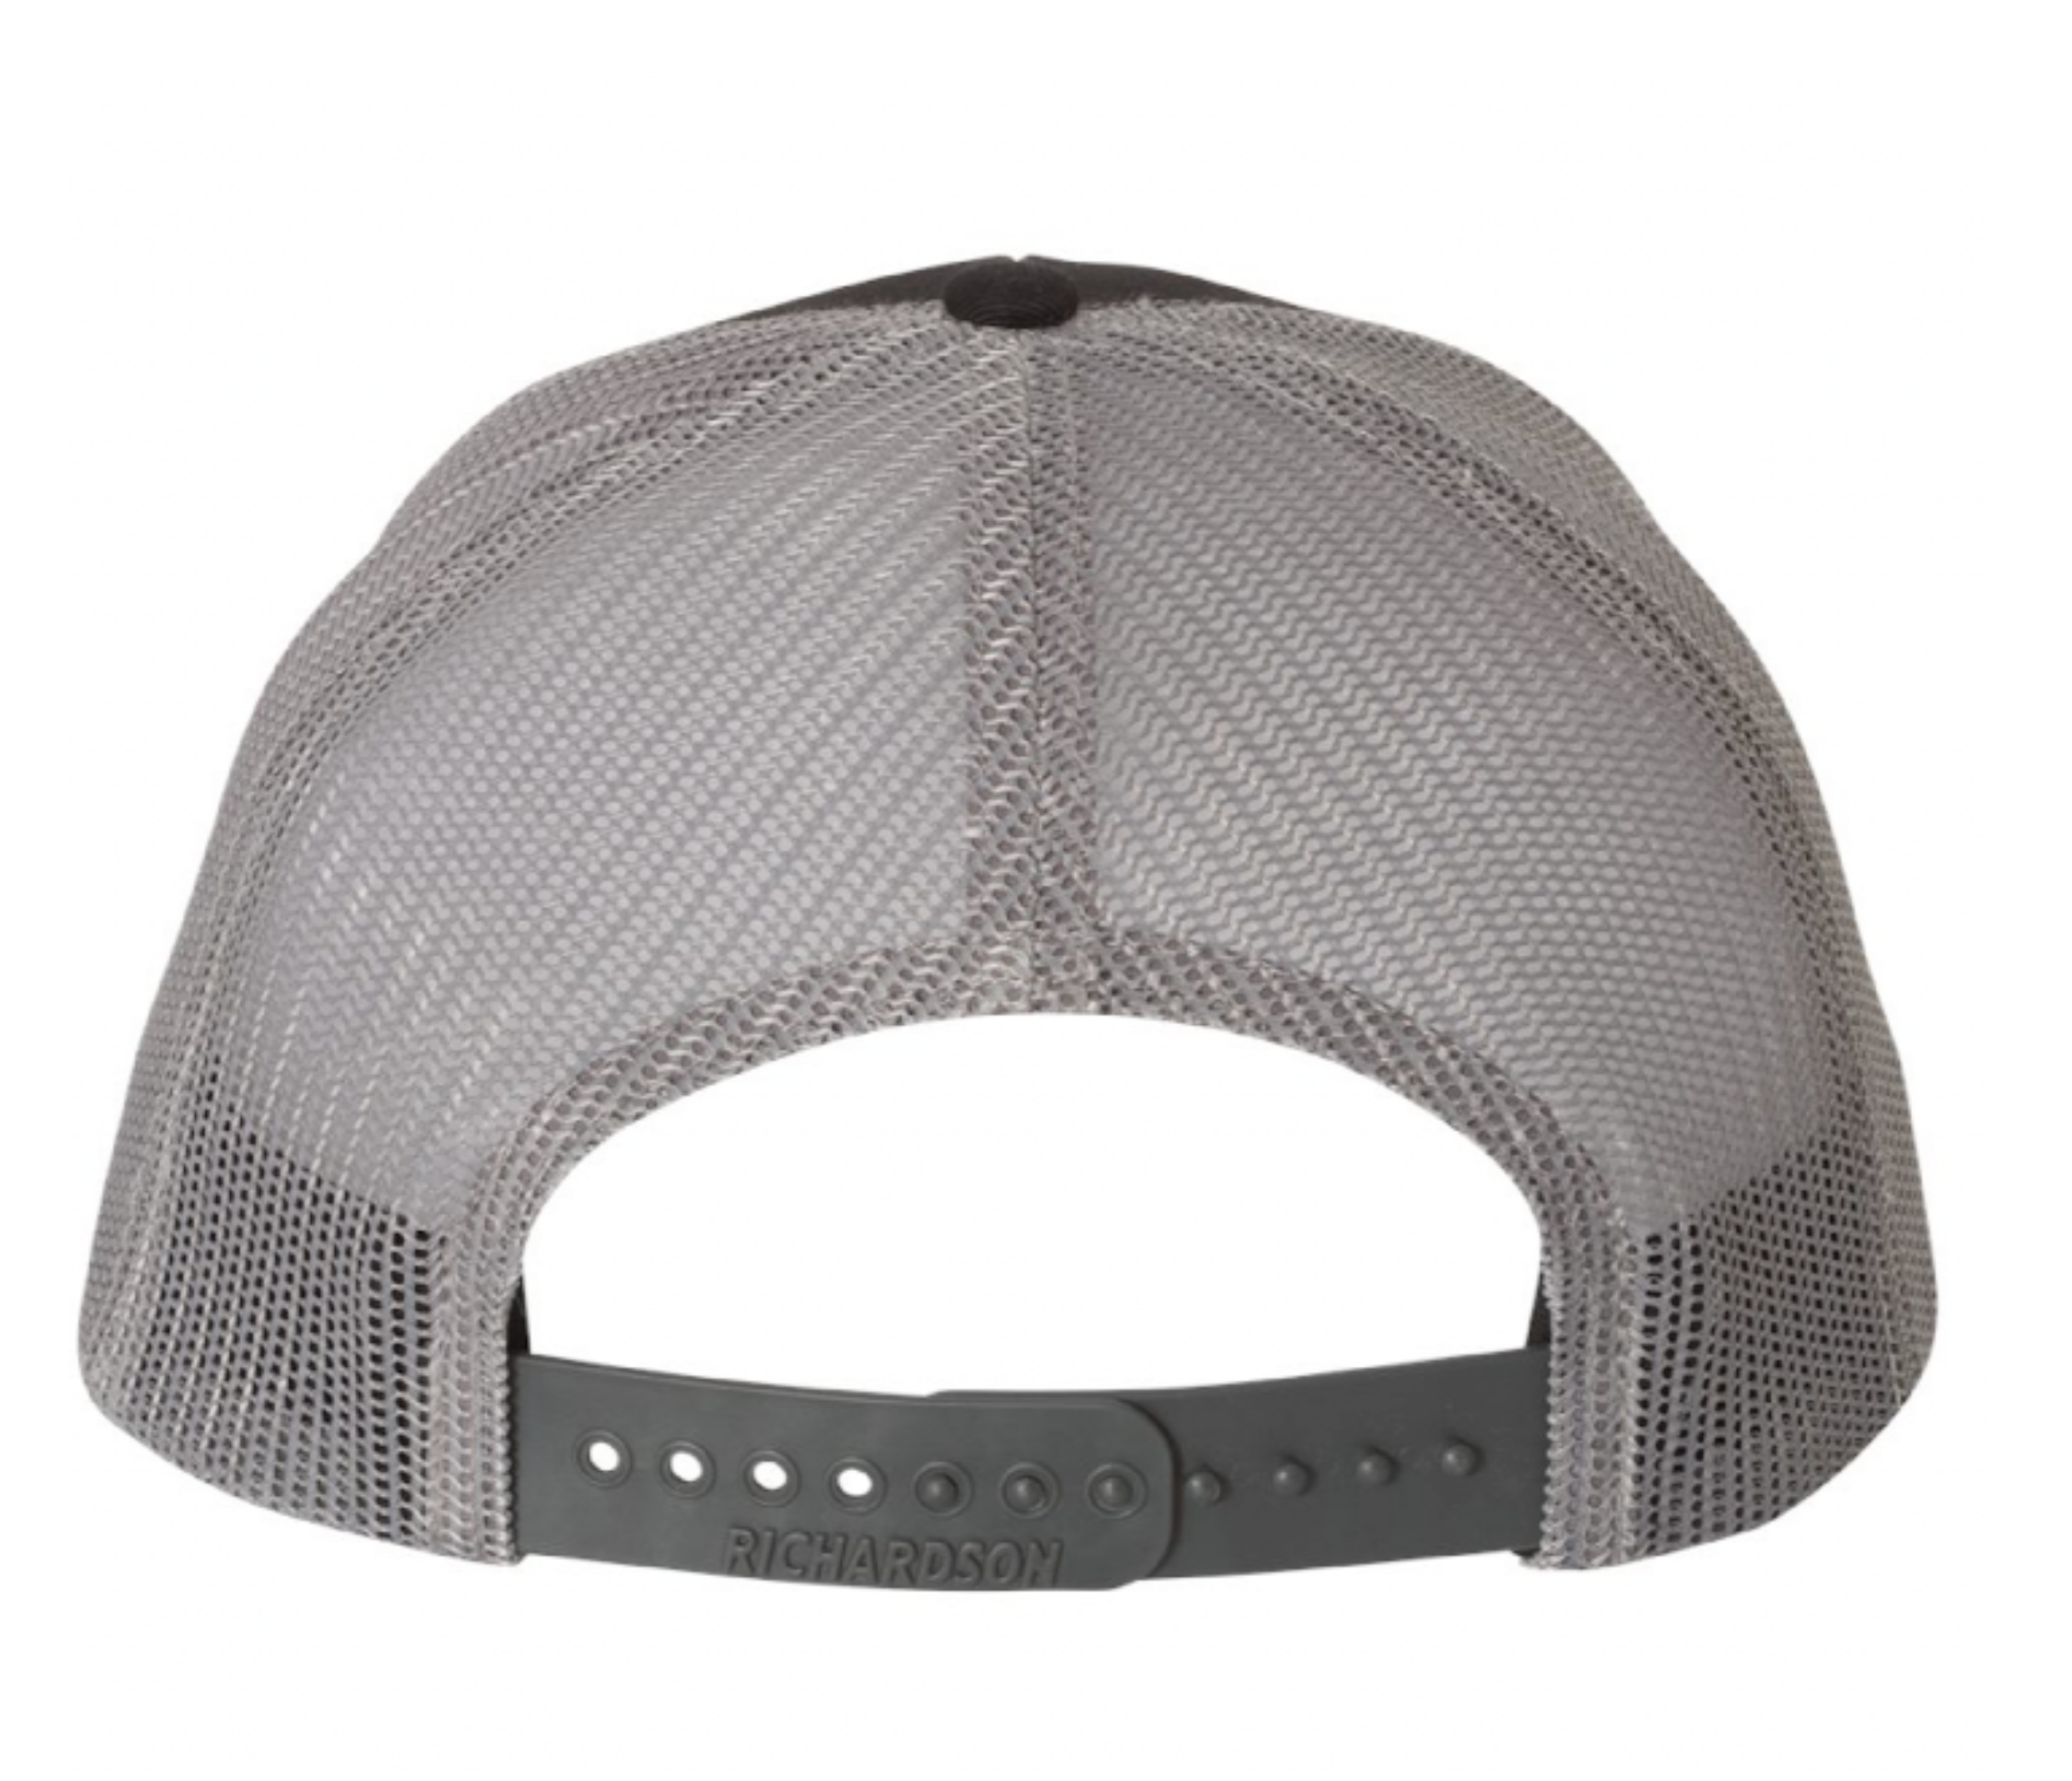 CONQUER - BLACK AND GRAY - MESH SNAP BACK HAT WITH TWILL EMBLEM